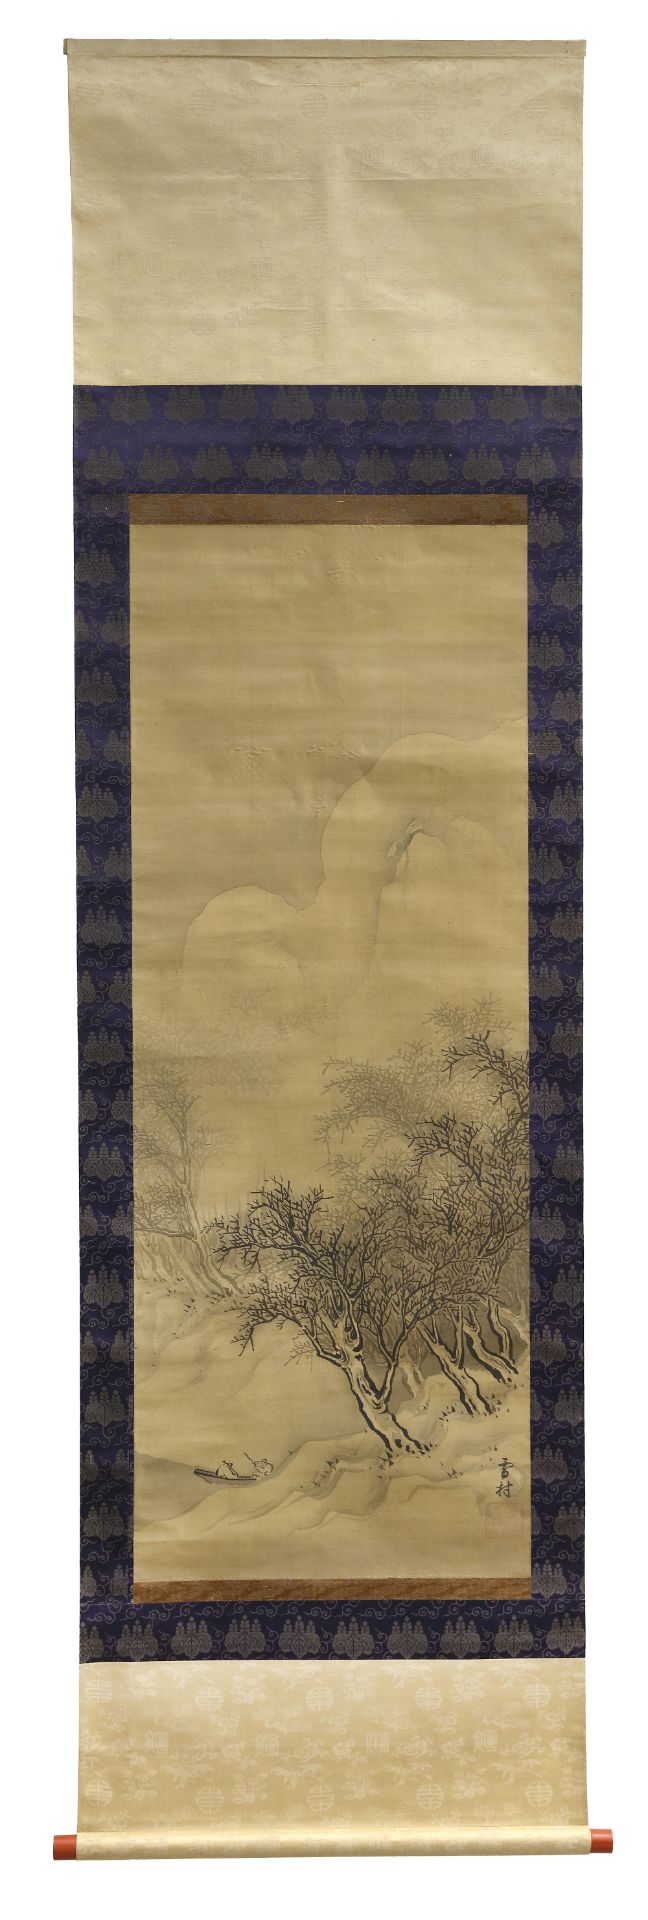 A JAPANESE HANDSCROLL DEPICTING A LANDSCAPE AND A BOAT